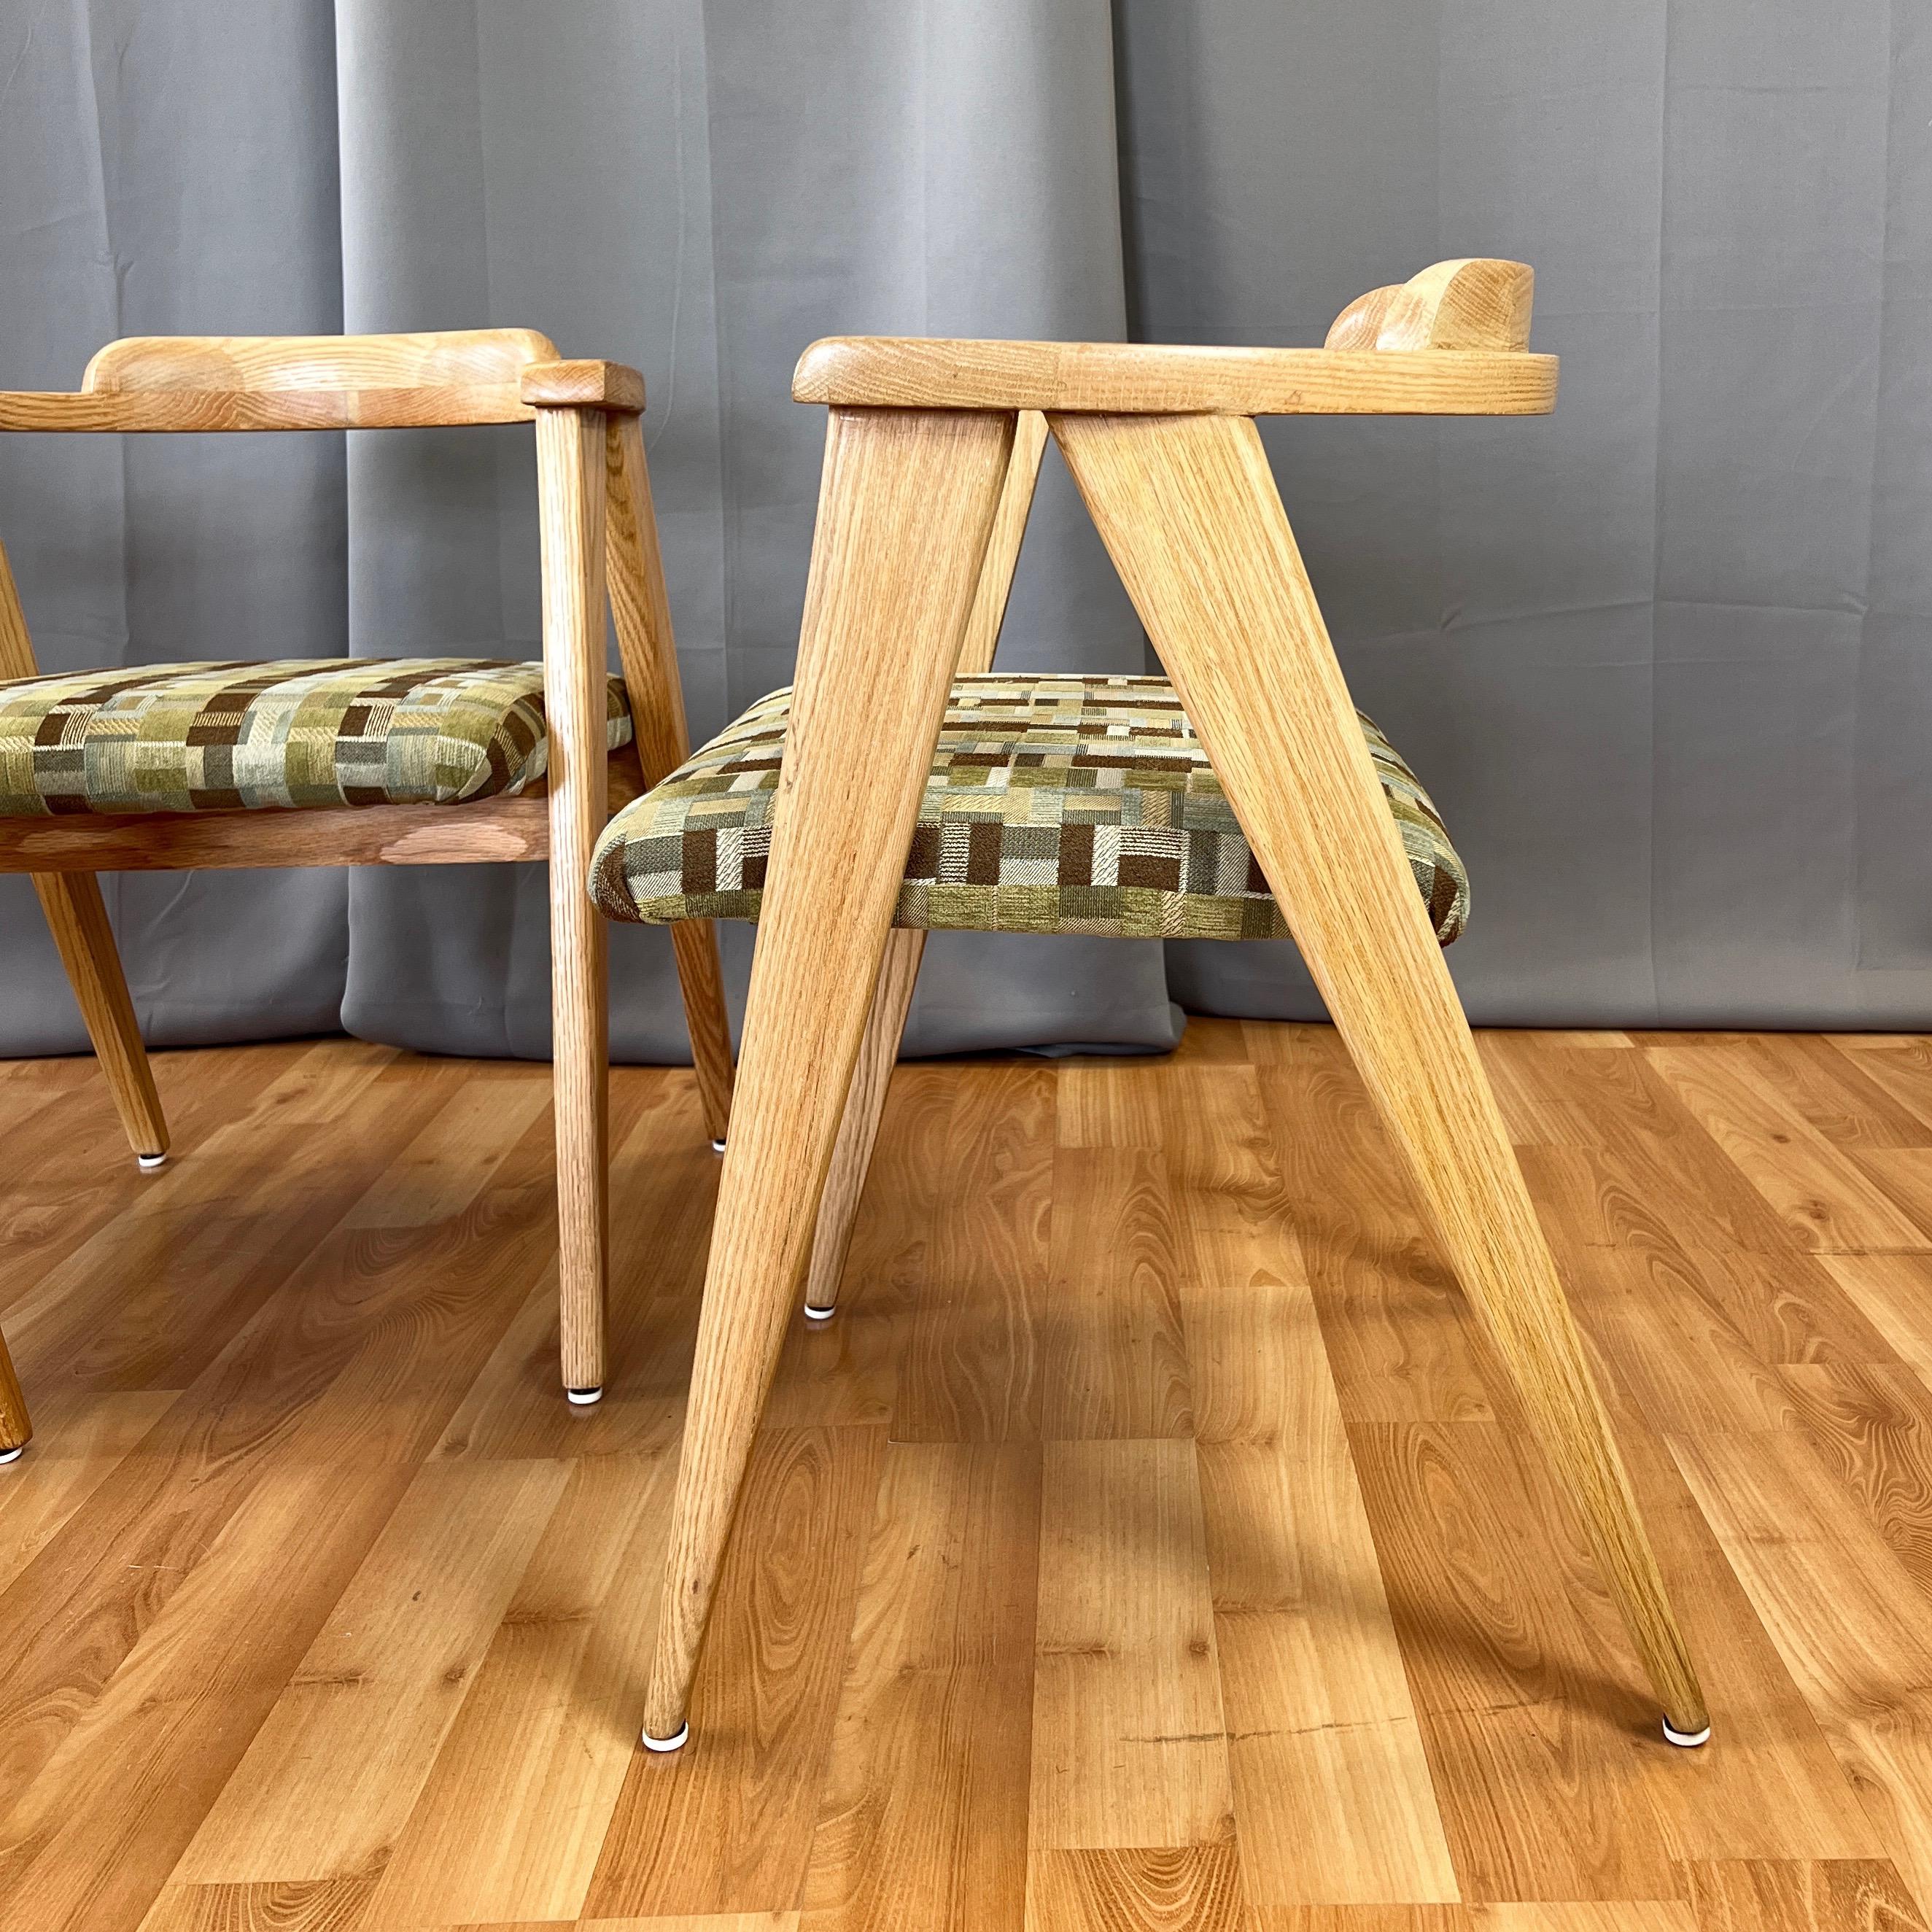 Set of Four Indiana Chair Co. Live Oak Compass Leg Dining Chairs, Early 1950s In Good Condition For Sale In San Francisco, CA